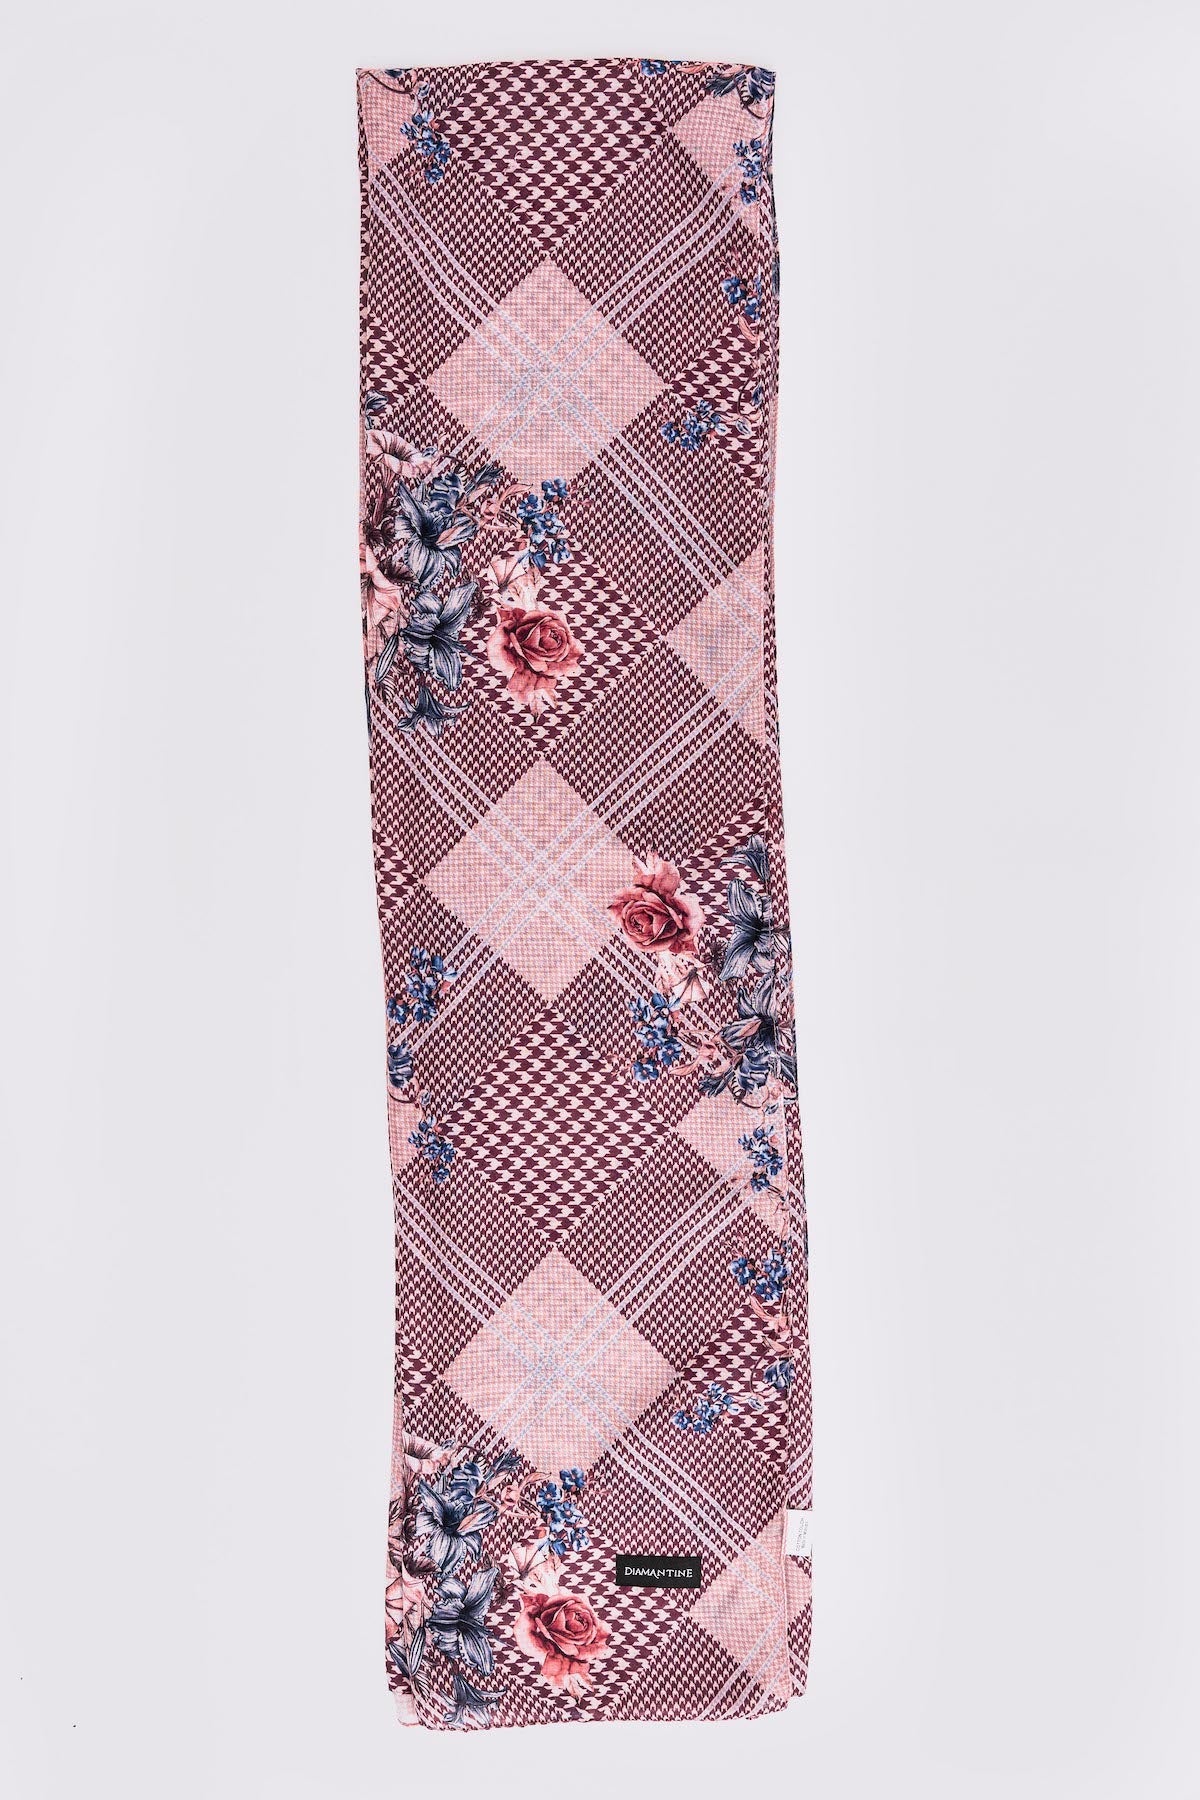 Women's Lightweight Head Scarf in Pink Mixed Check and Floral Print